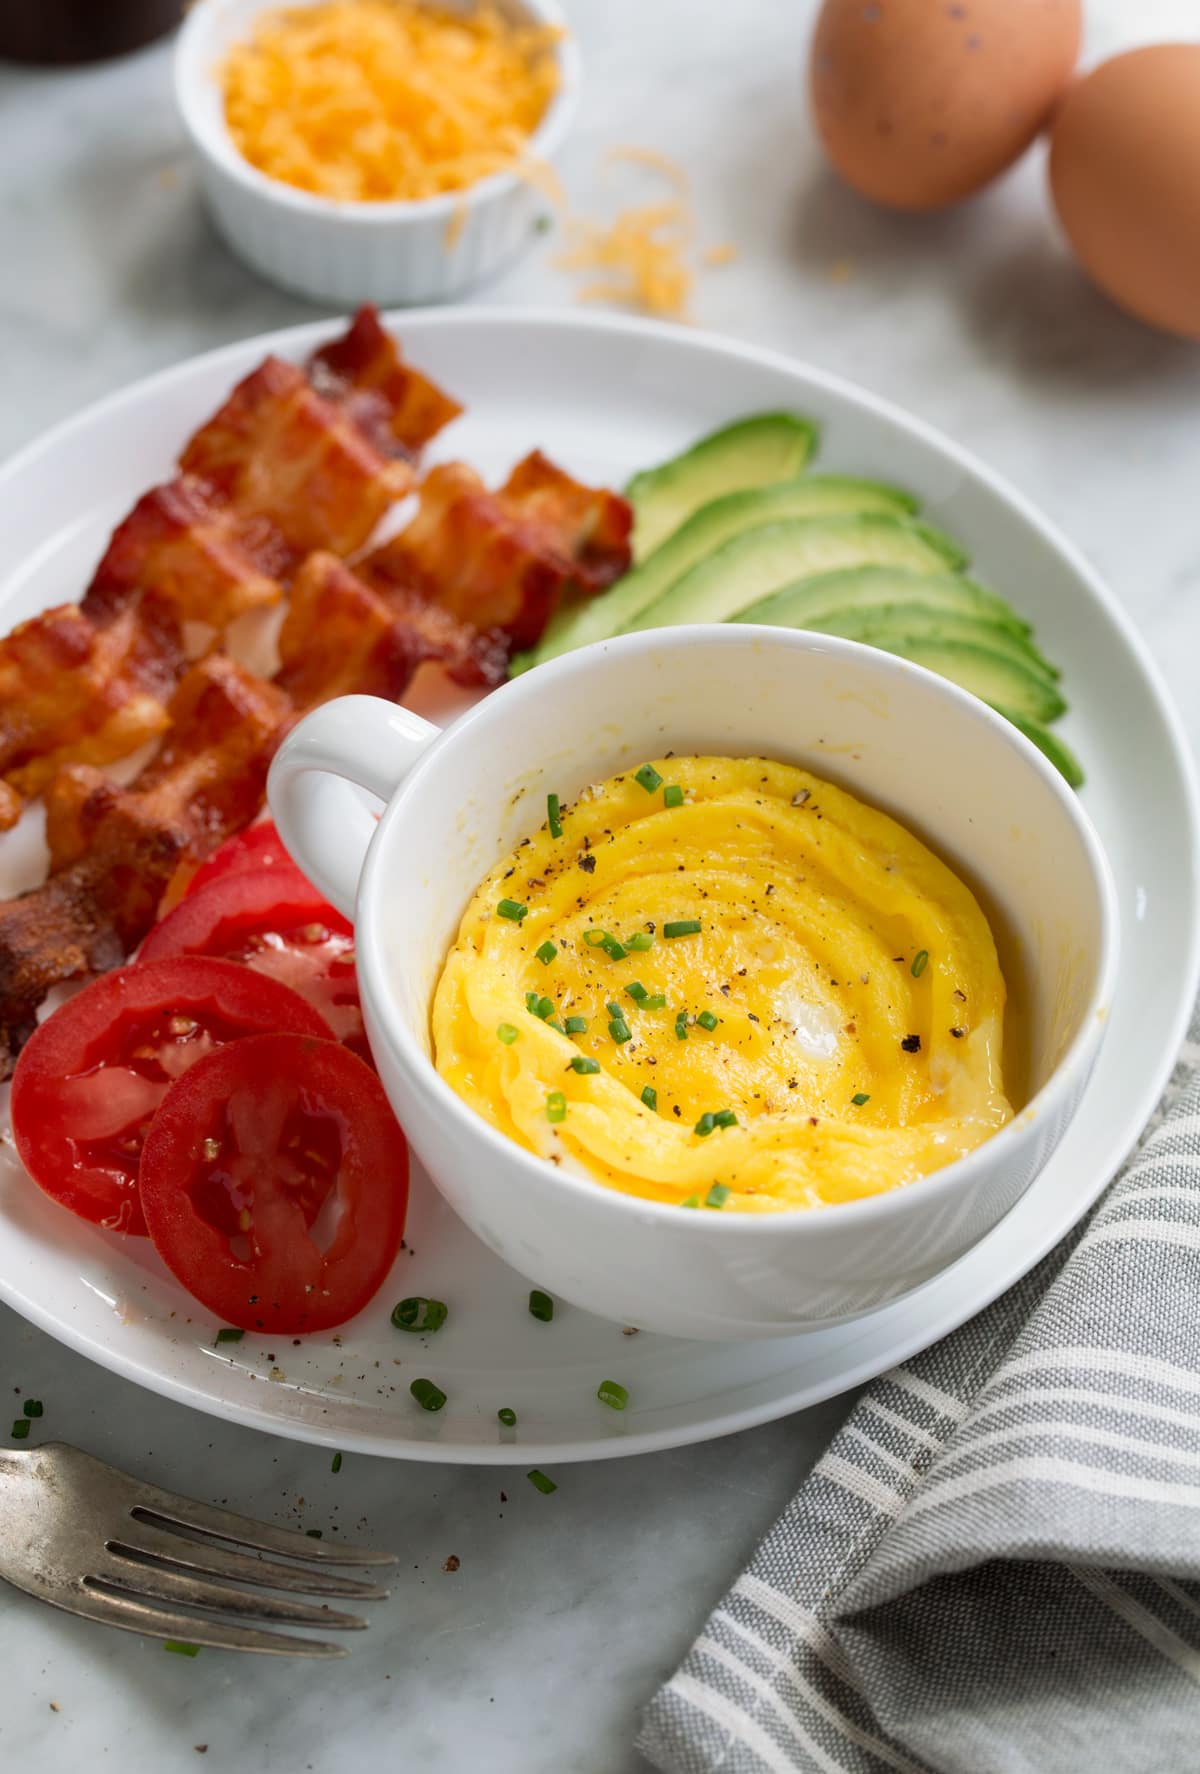 Microwave eggs with bacon, tomatoes and avocado to the side on a plate.